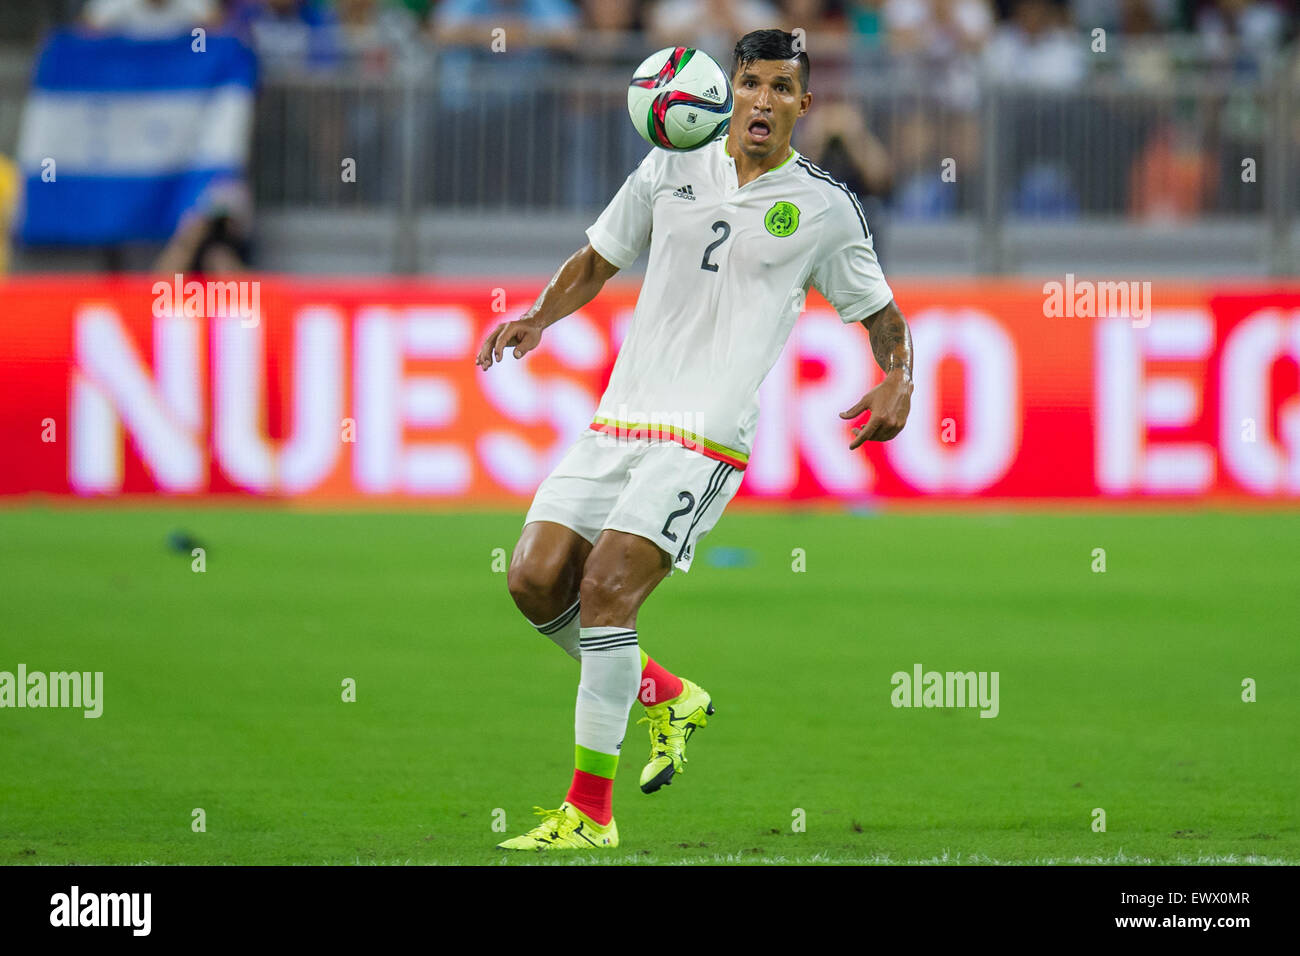 July 1, 2015: Mexico defender Francisco Javier Rodriguez (2) controls the ball during the 2nd half of an international soccer match between Honduras and Mexico at NRG Stadium in Houston, TX. The game ended in a 0-0 draw.Trask Smith/CSM Stock Photo